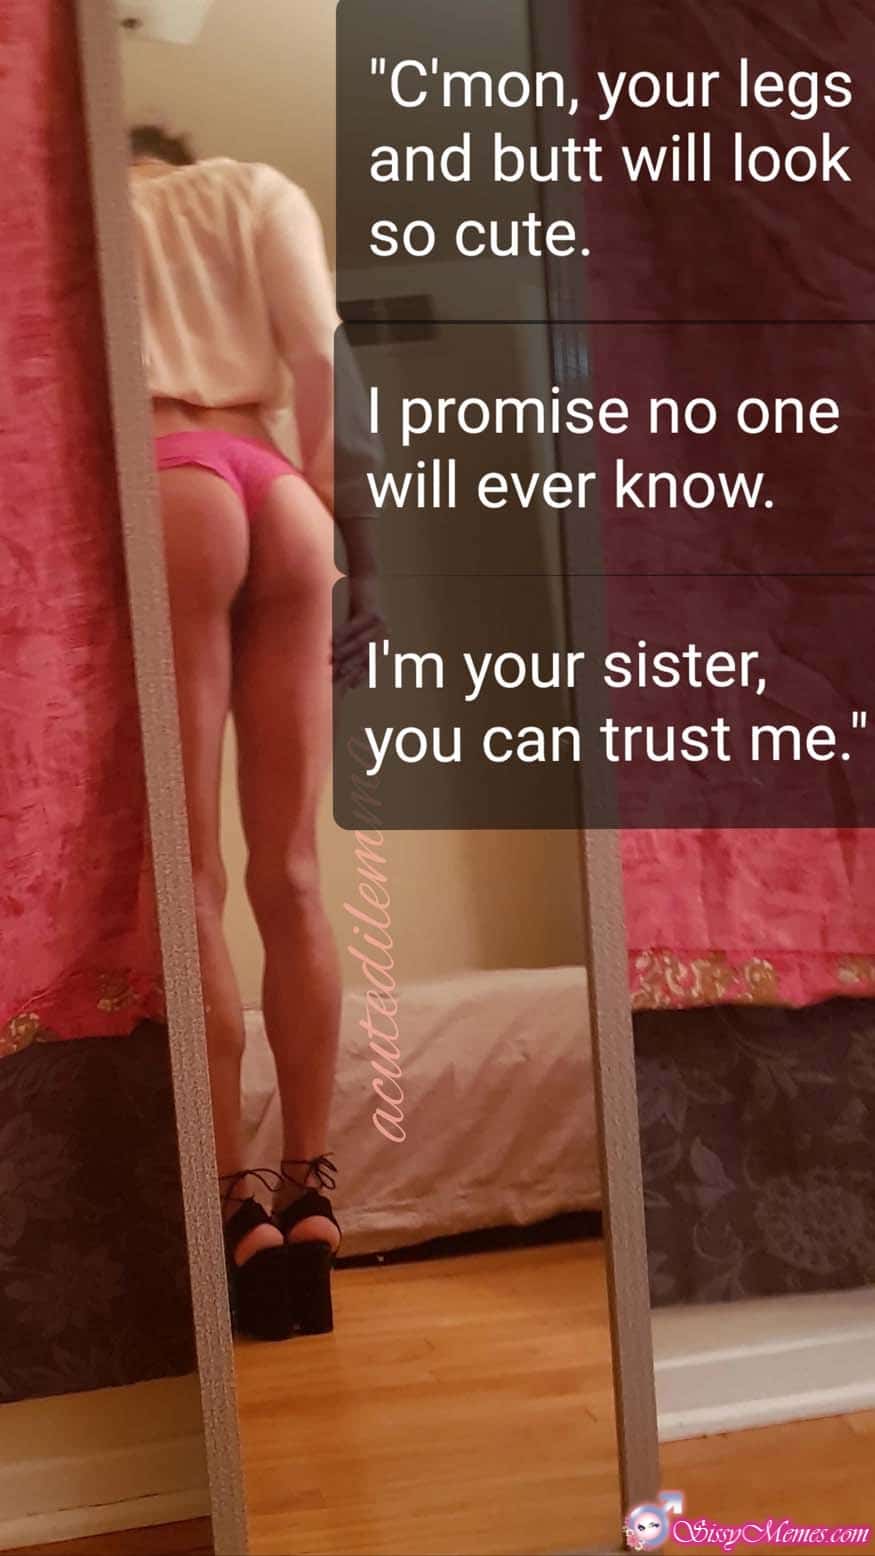 Sexy Forced Feminization Femdom hotwife caption: “C’mon, your legs and butt will look so cute. I promise no one will ever know. I’m your sister, || you can trust me. acutedilem Beta Male Gets Filmed Secretly